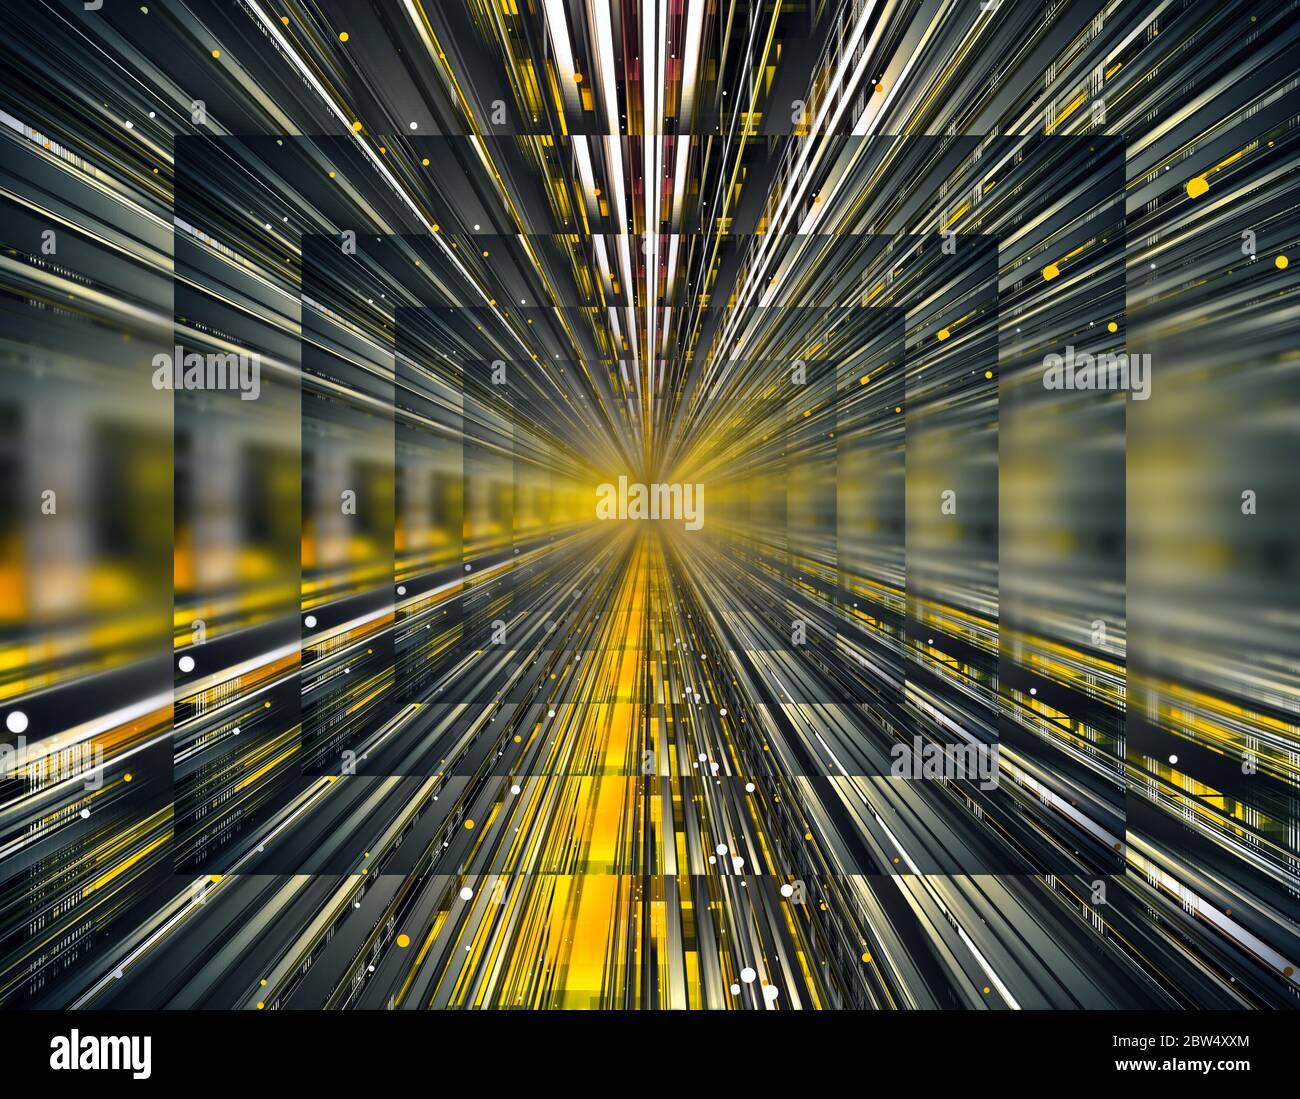 Background of fast moving lights and futuristic shapes, with a tunnel effect  Stock Photo - Alamy